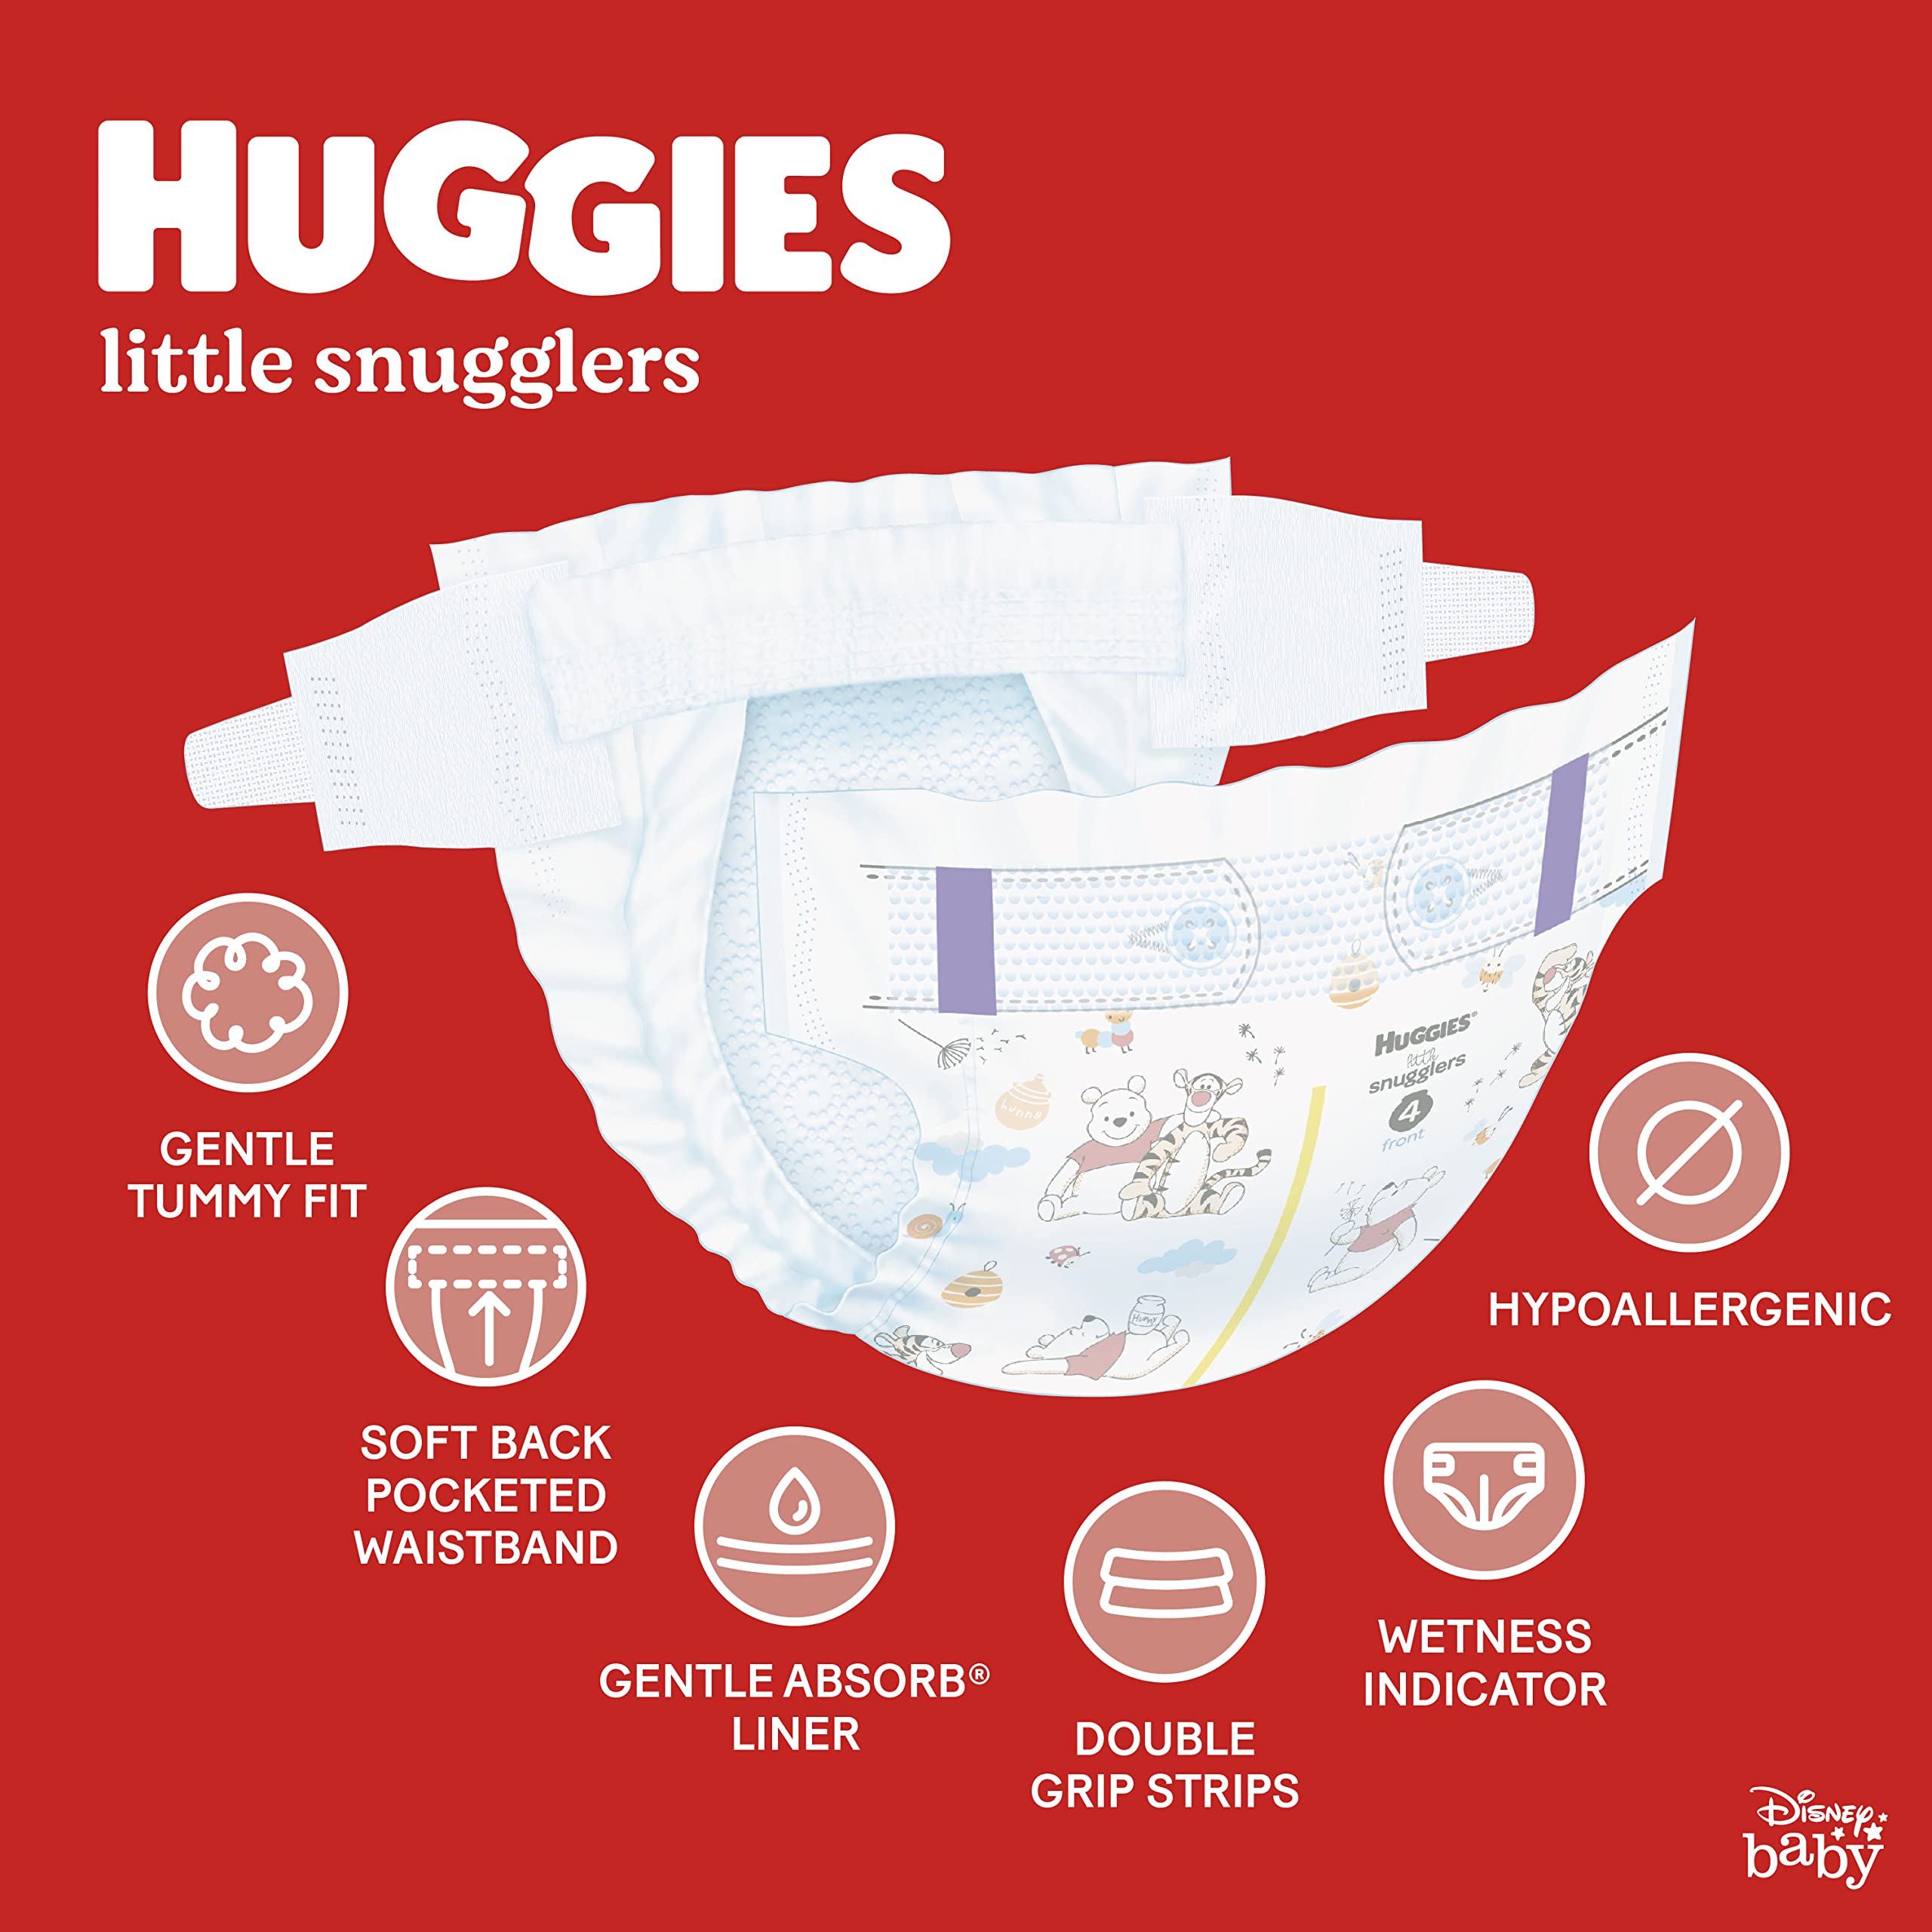 Baby Diapers and Wipes Bundle: Huggies Little Snugglers Size 2, 180ct & Natural Care Sensitive Baby Diaper Wipes, Unscented, 12 Flip-Top Packs (768 Wipes Total) (Packaging May Vary)